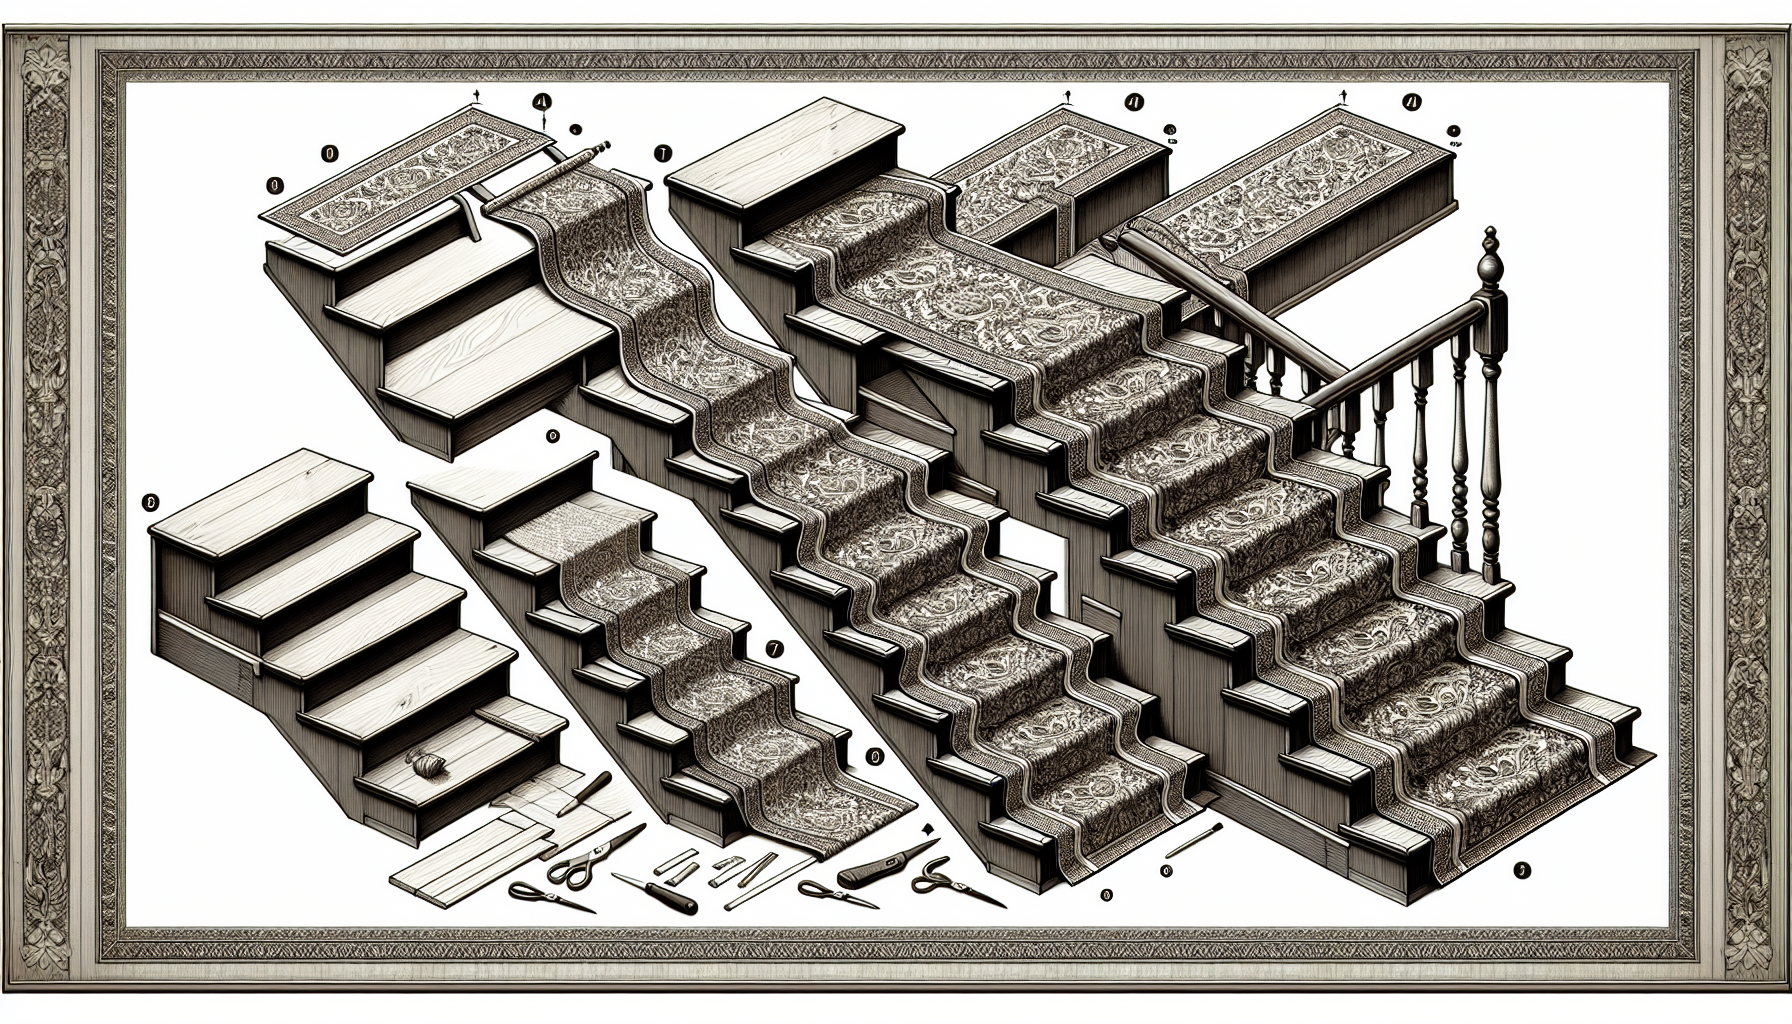 Illustration of the installation process of a stair runner